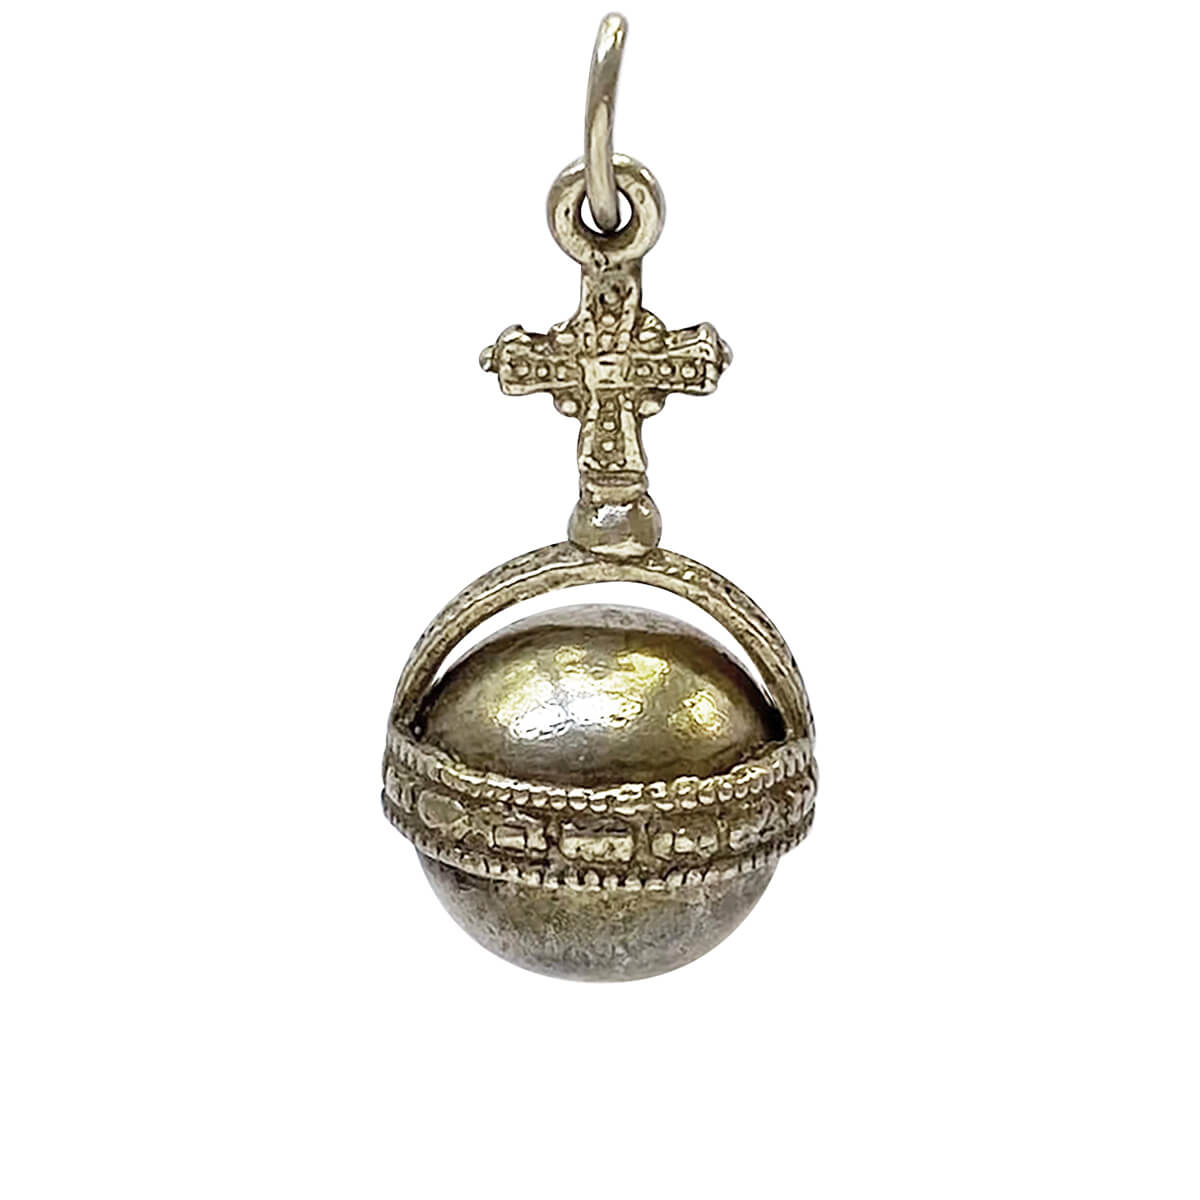 Vintage silver orb and cross charm royal pendant from Charmarama Charms